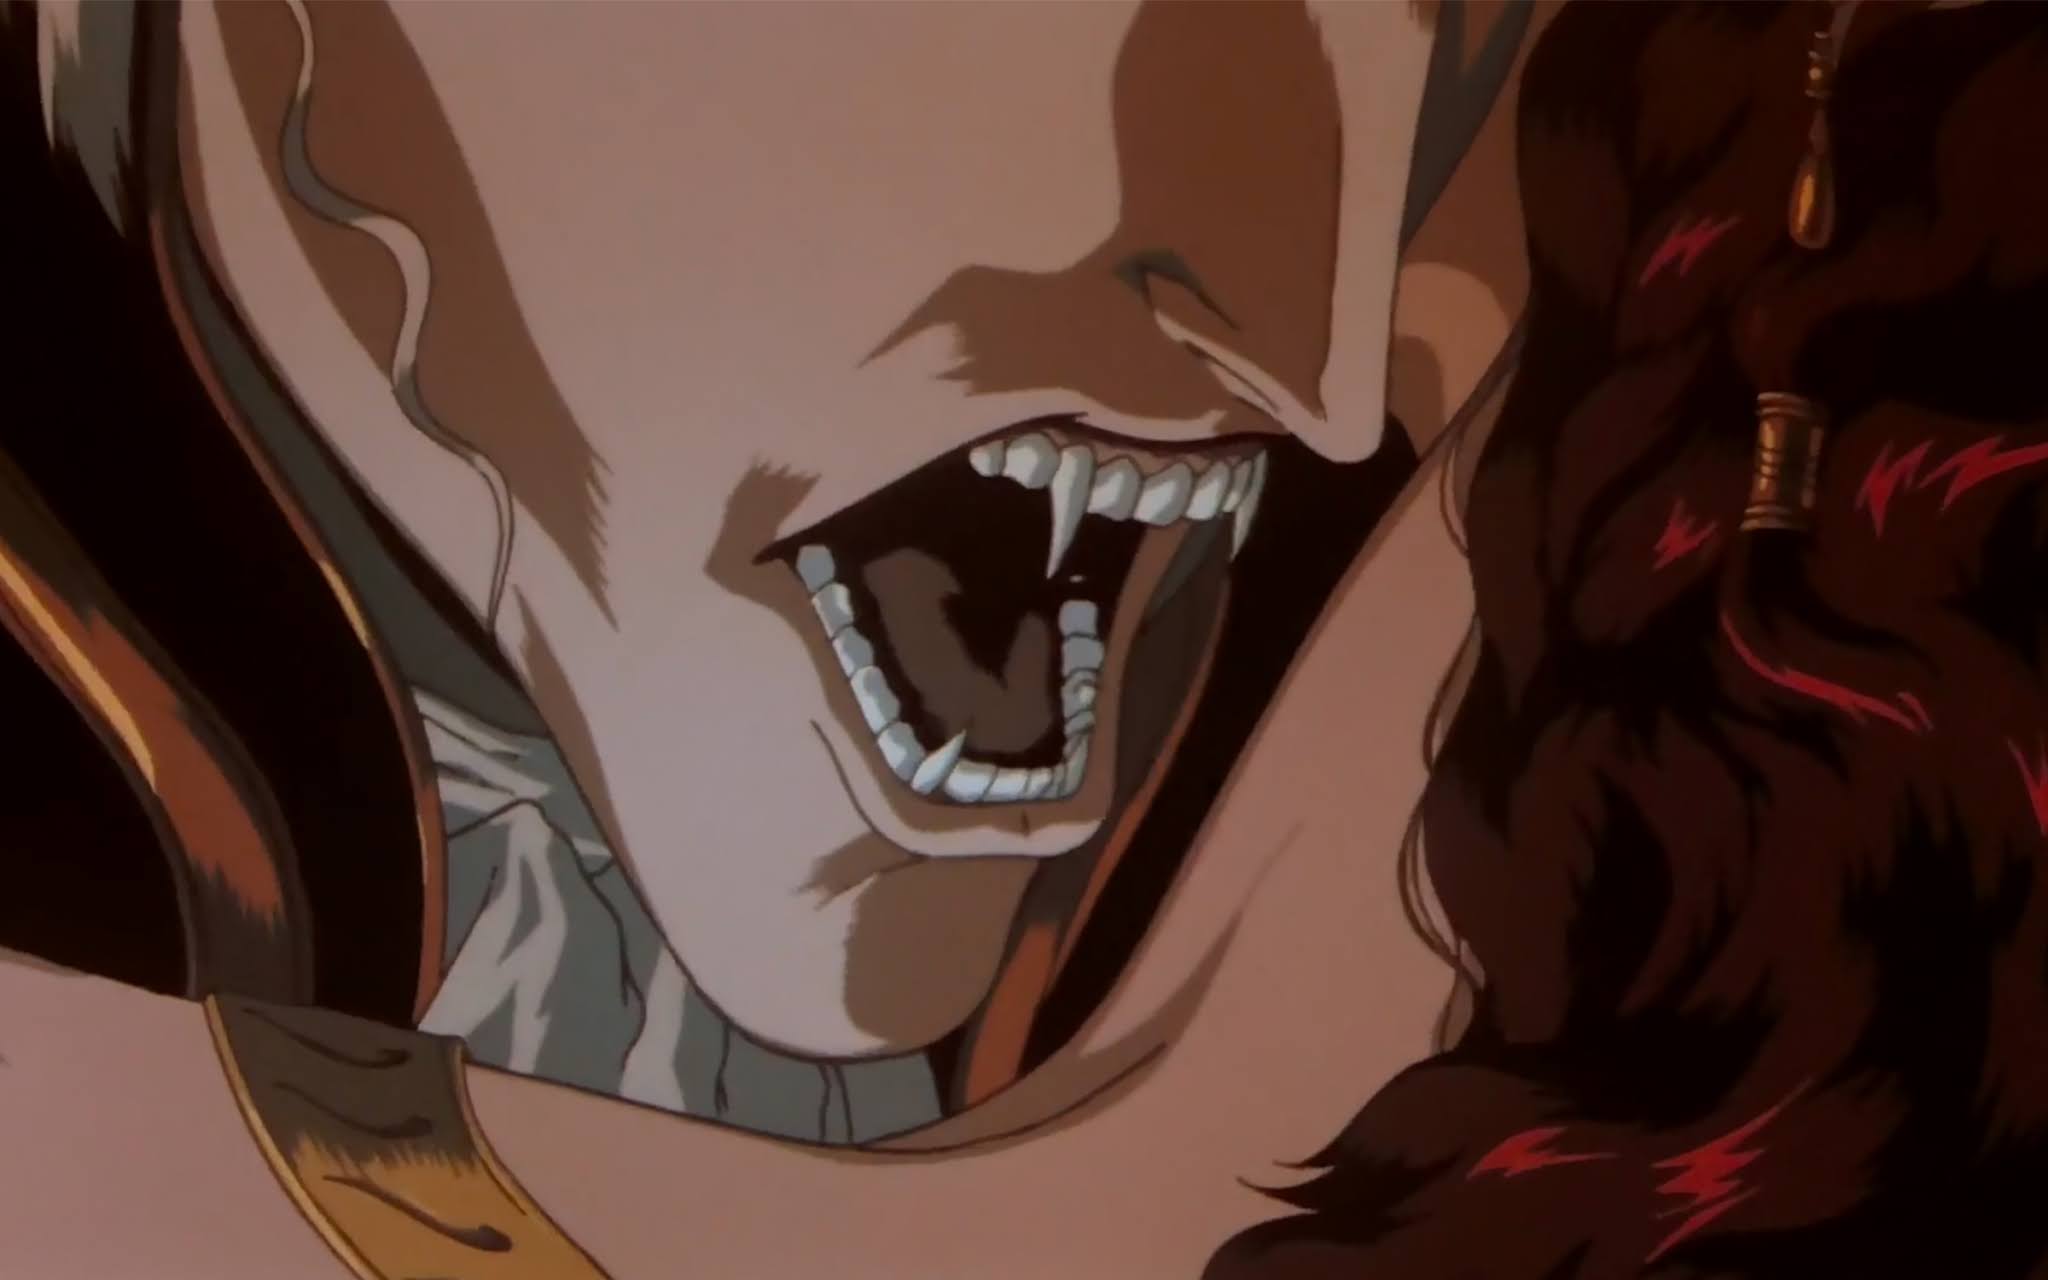 Vampire Hunter D Bloodlust: A Gothic Feast For The Eyes